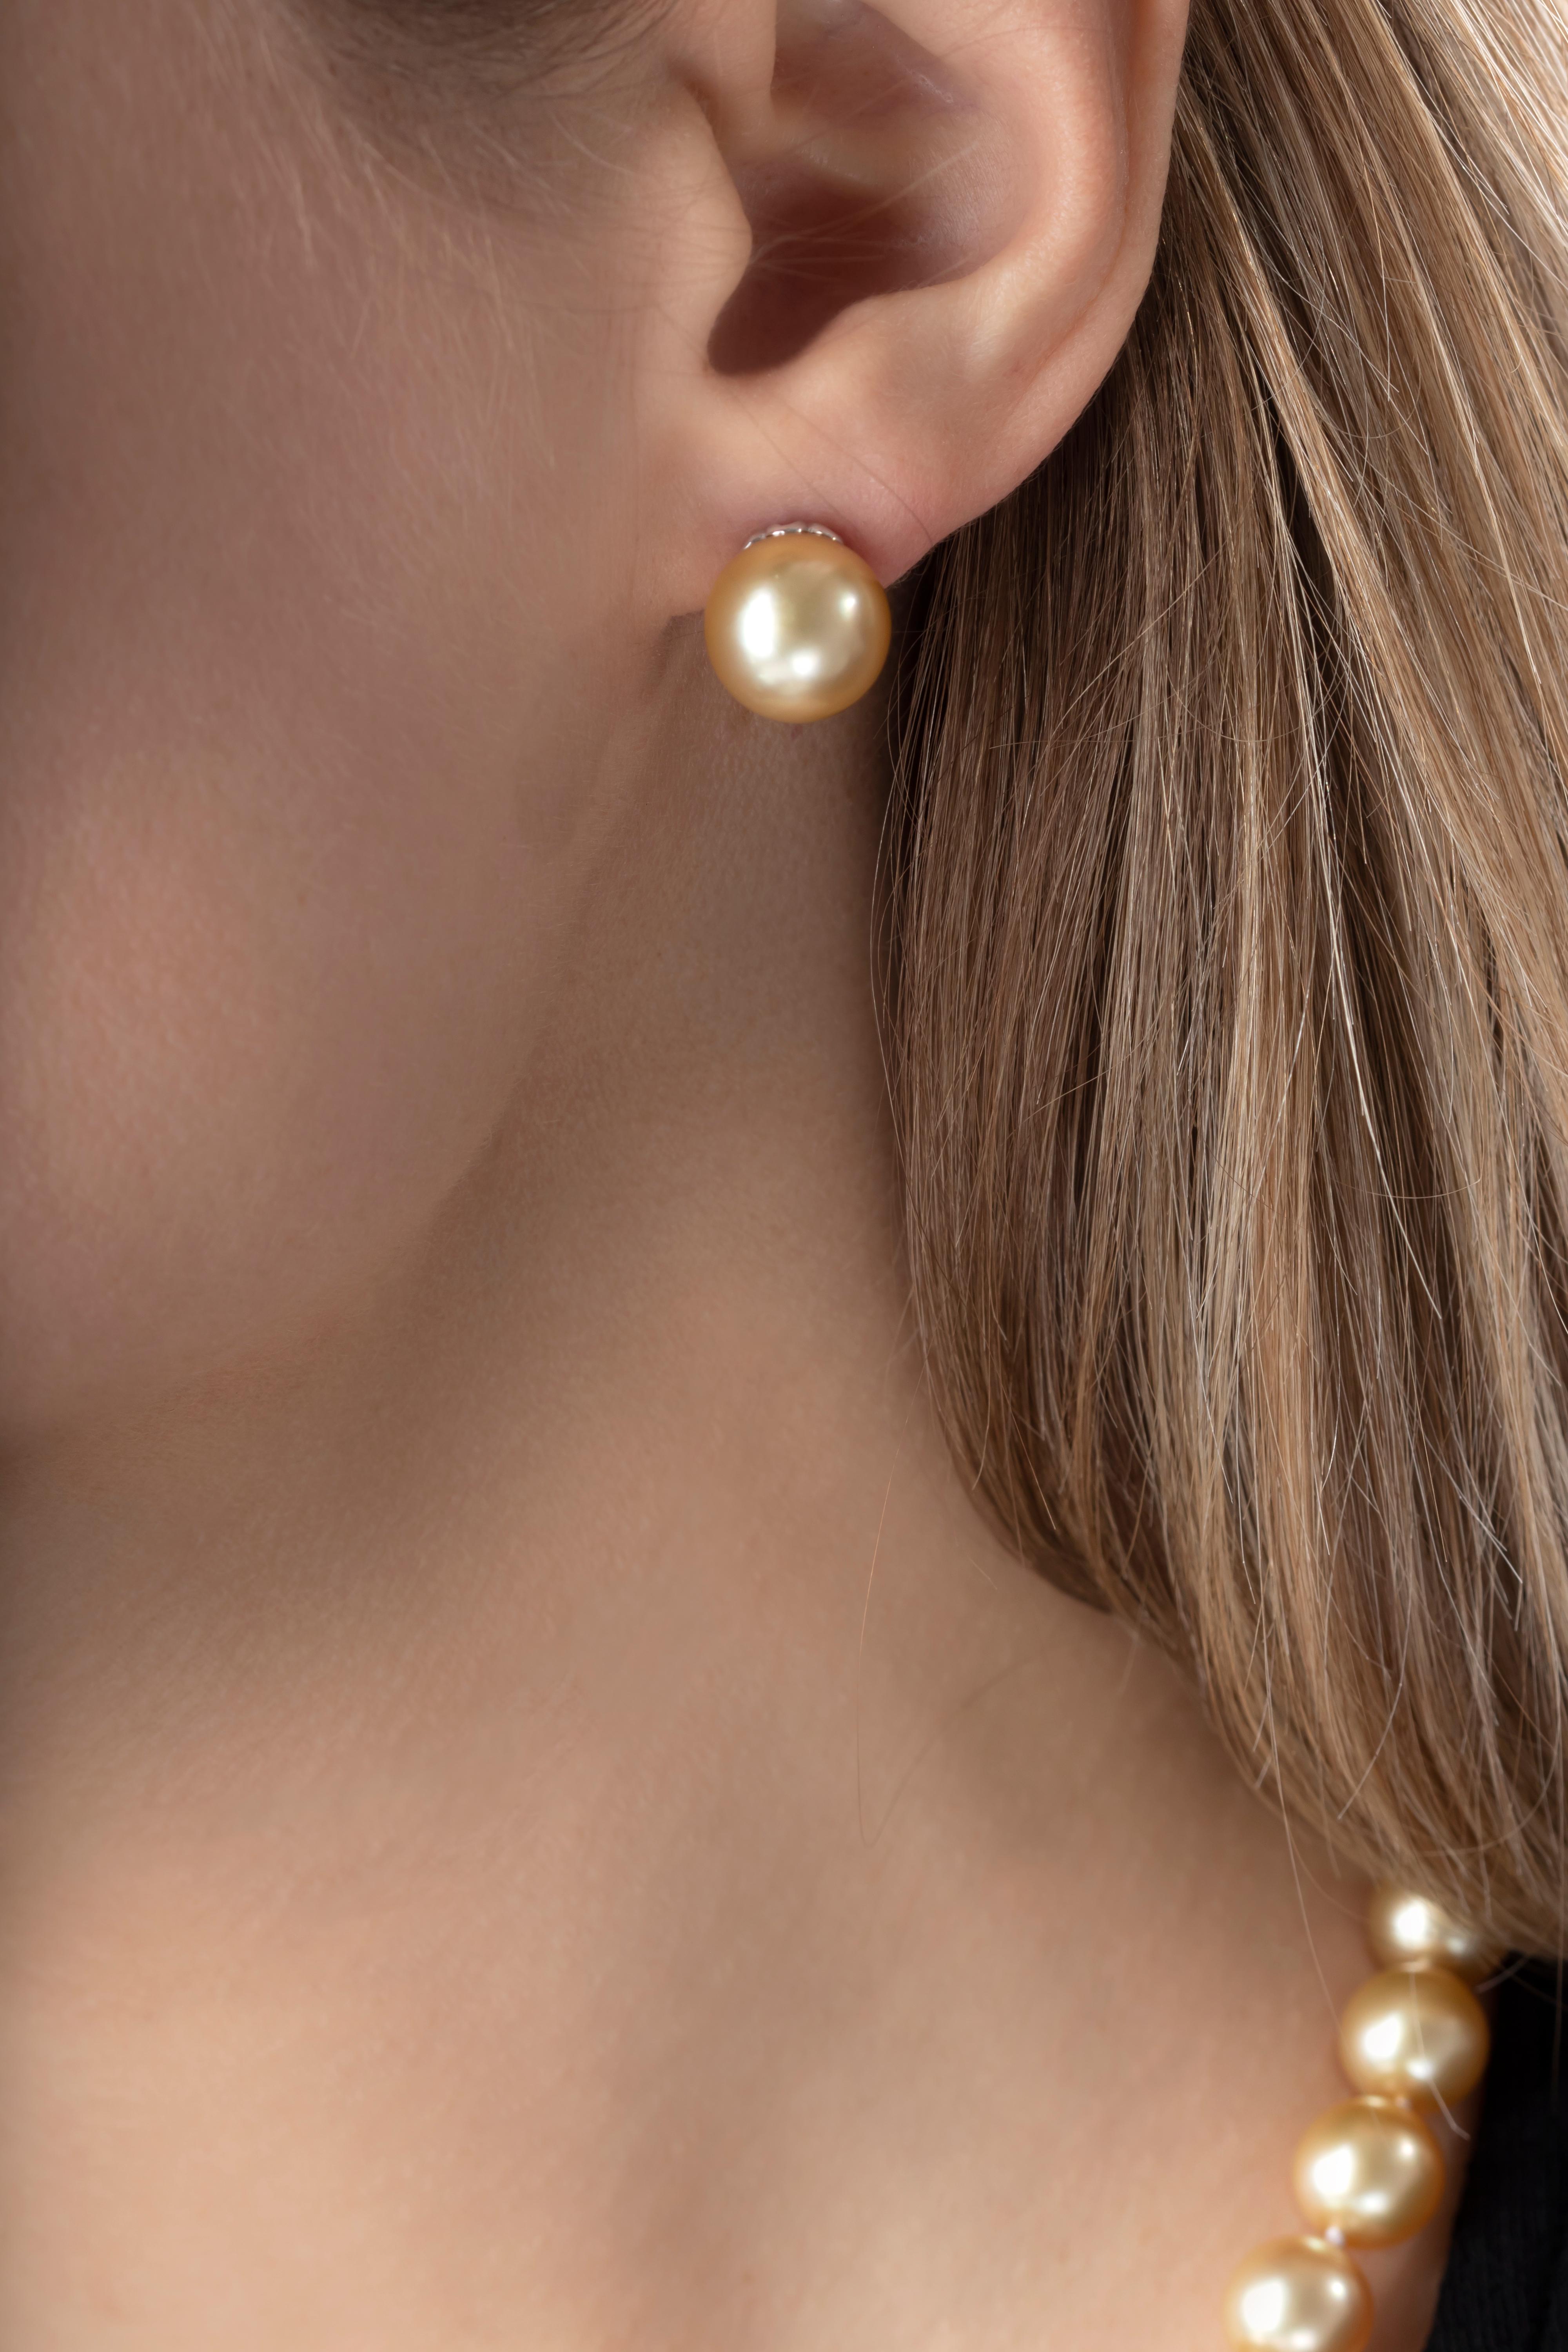 These elegant natural-coloured Golden South Sea pearl studs from Yoko London are a jewellery box essential. The rarest of all pearl varieties, these Golden South Sea pearls possess a magnificent hue which is perfectly accentuated by the understated